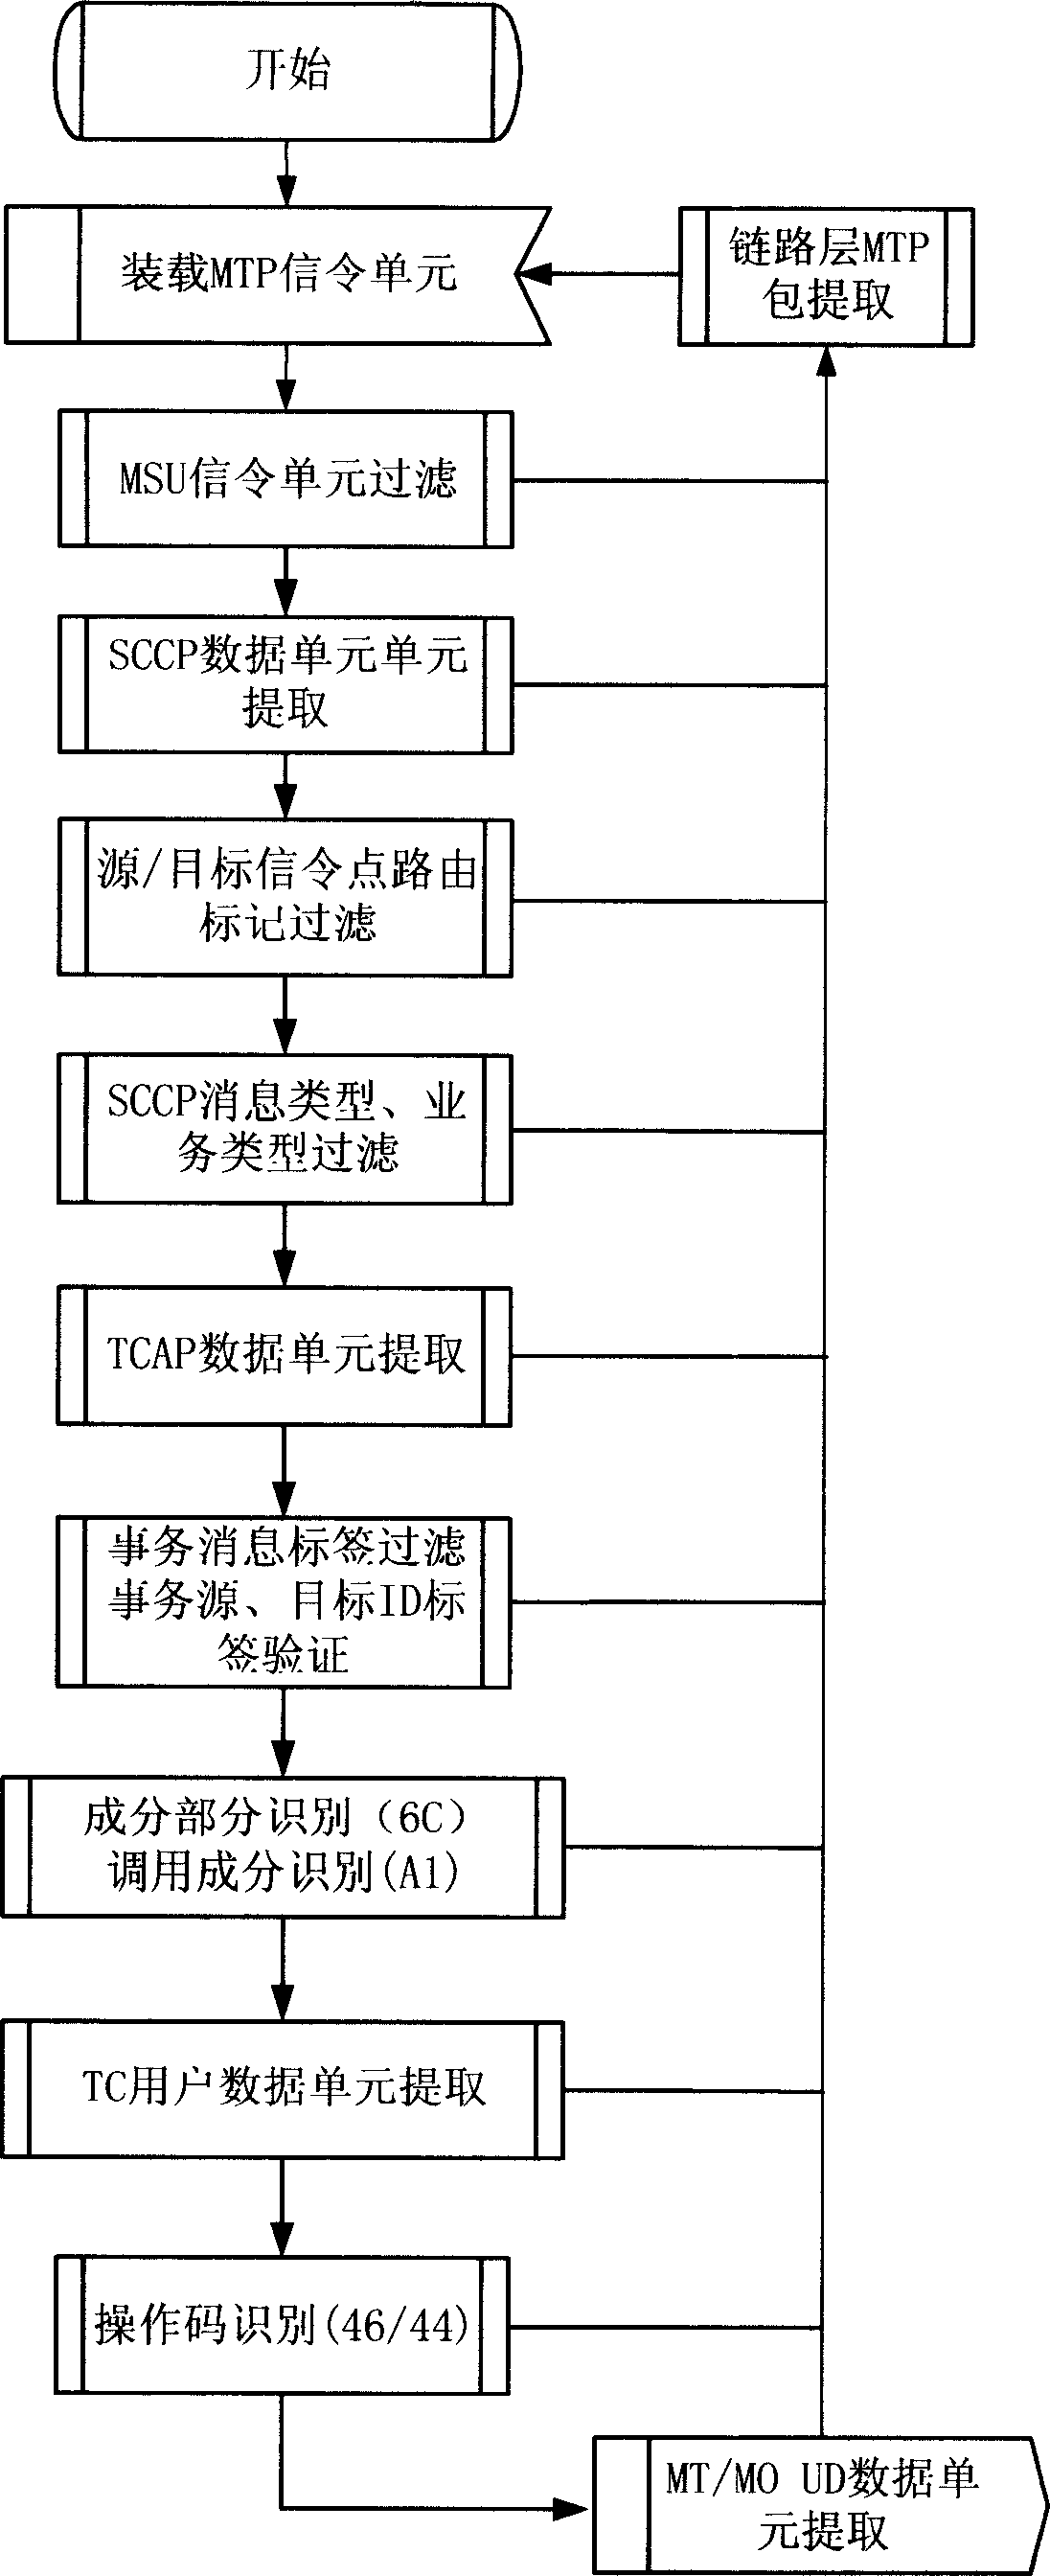 Method of one-way short message pick-up based on MAP layer protocol